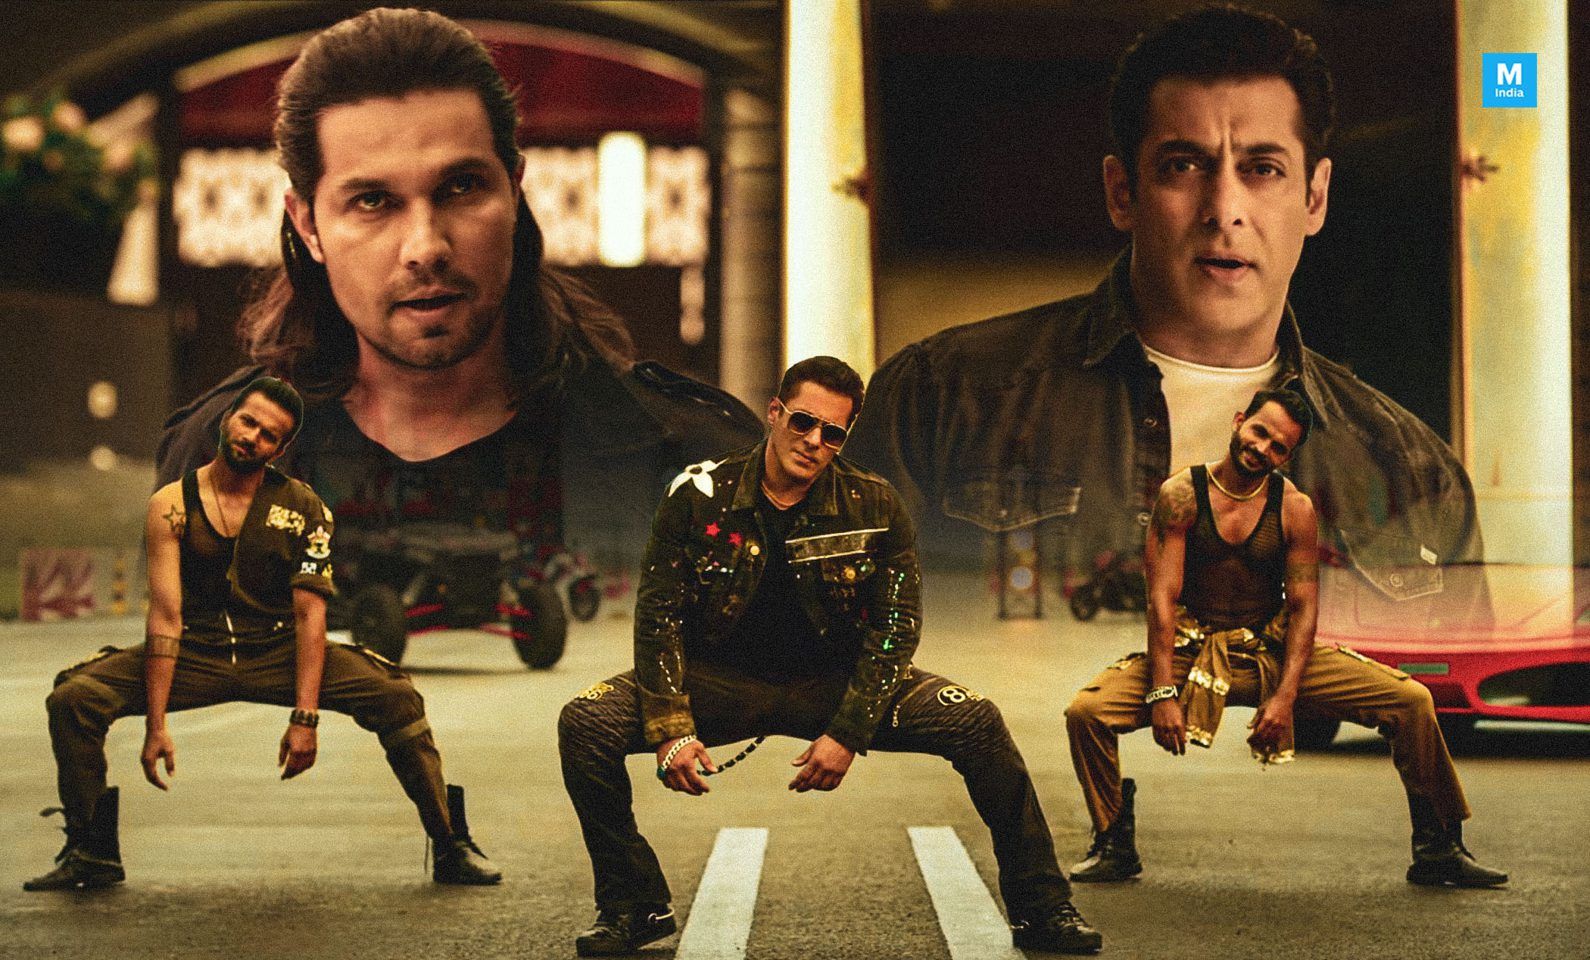 Radhe: Your Most Wanted Bhai' Trailer: Salman Khan Is Back With The Same Old Role In Formulaic Actioner